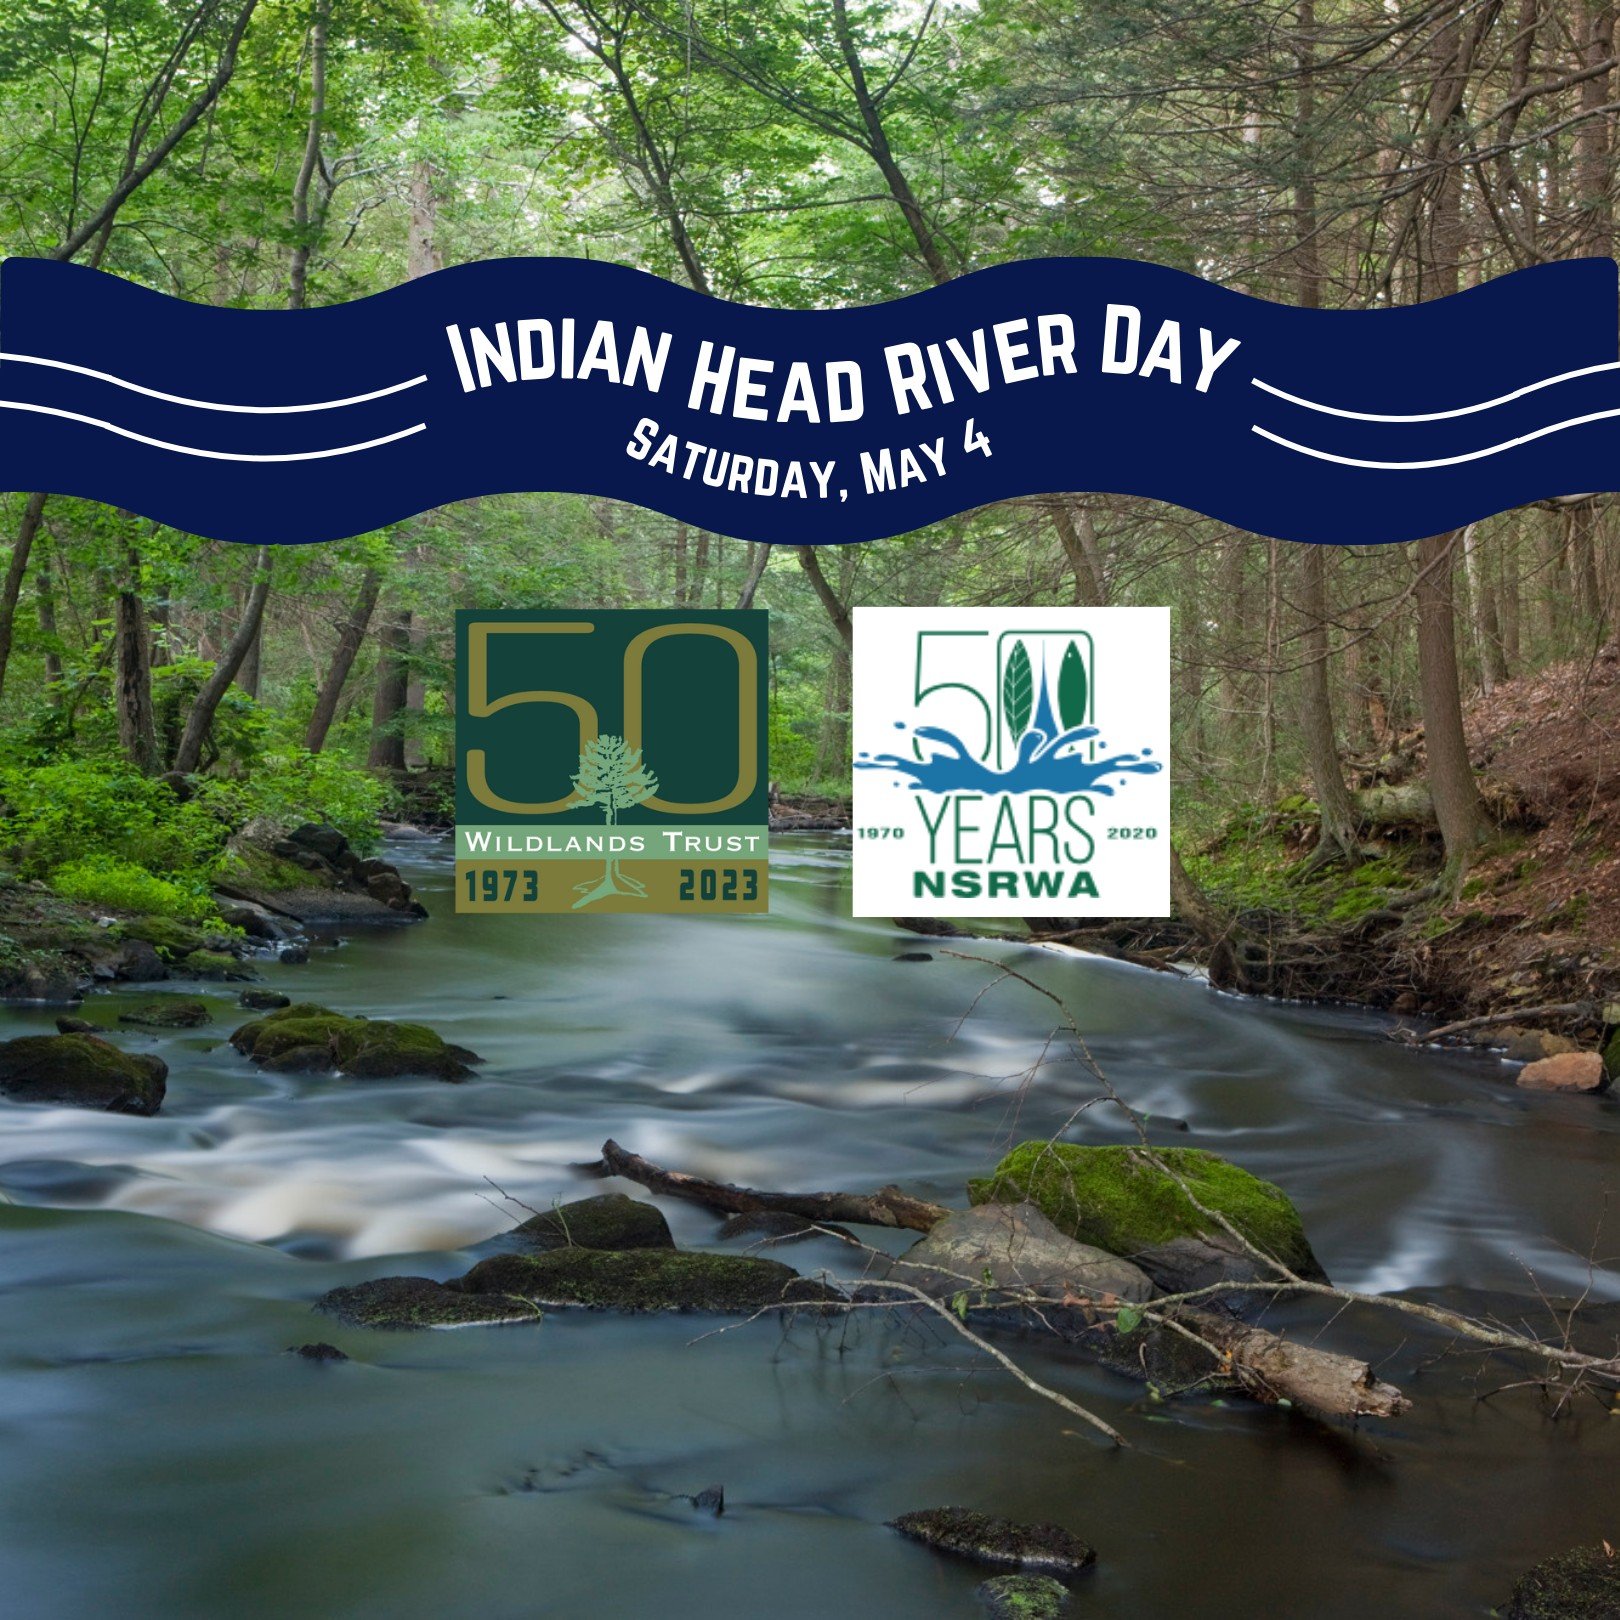 𝐓𝐡𝐢𝐬 𝐒𝐚𝐭𝐮𝐫𝐝𝐚𝐲: join the Indian Head River Coalition as we celebrate this amazing river and its surrounding land. Take part in a guided hike, kayak paddle, or BOTH! 🥾🚣

Learn more &amp; register ➡ bit.ly/ihr-day

The Indian Head River Co